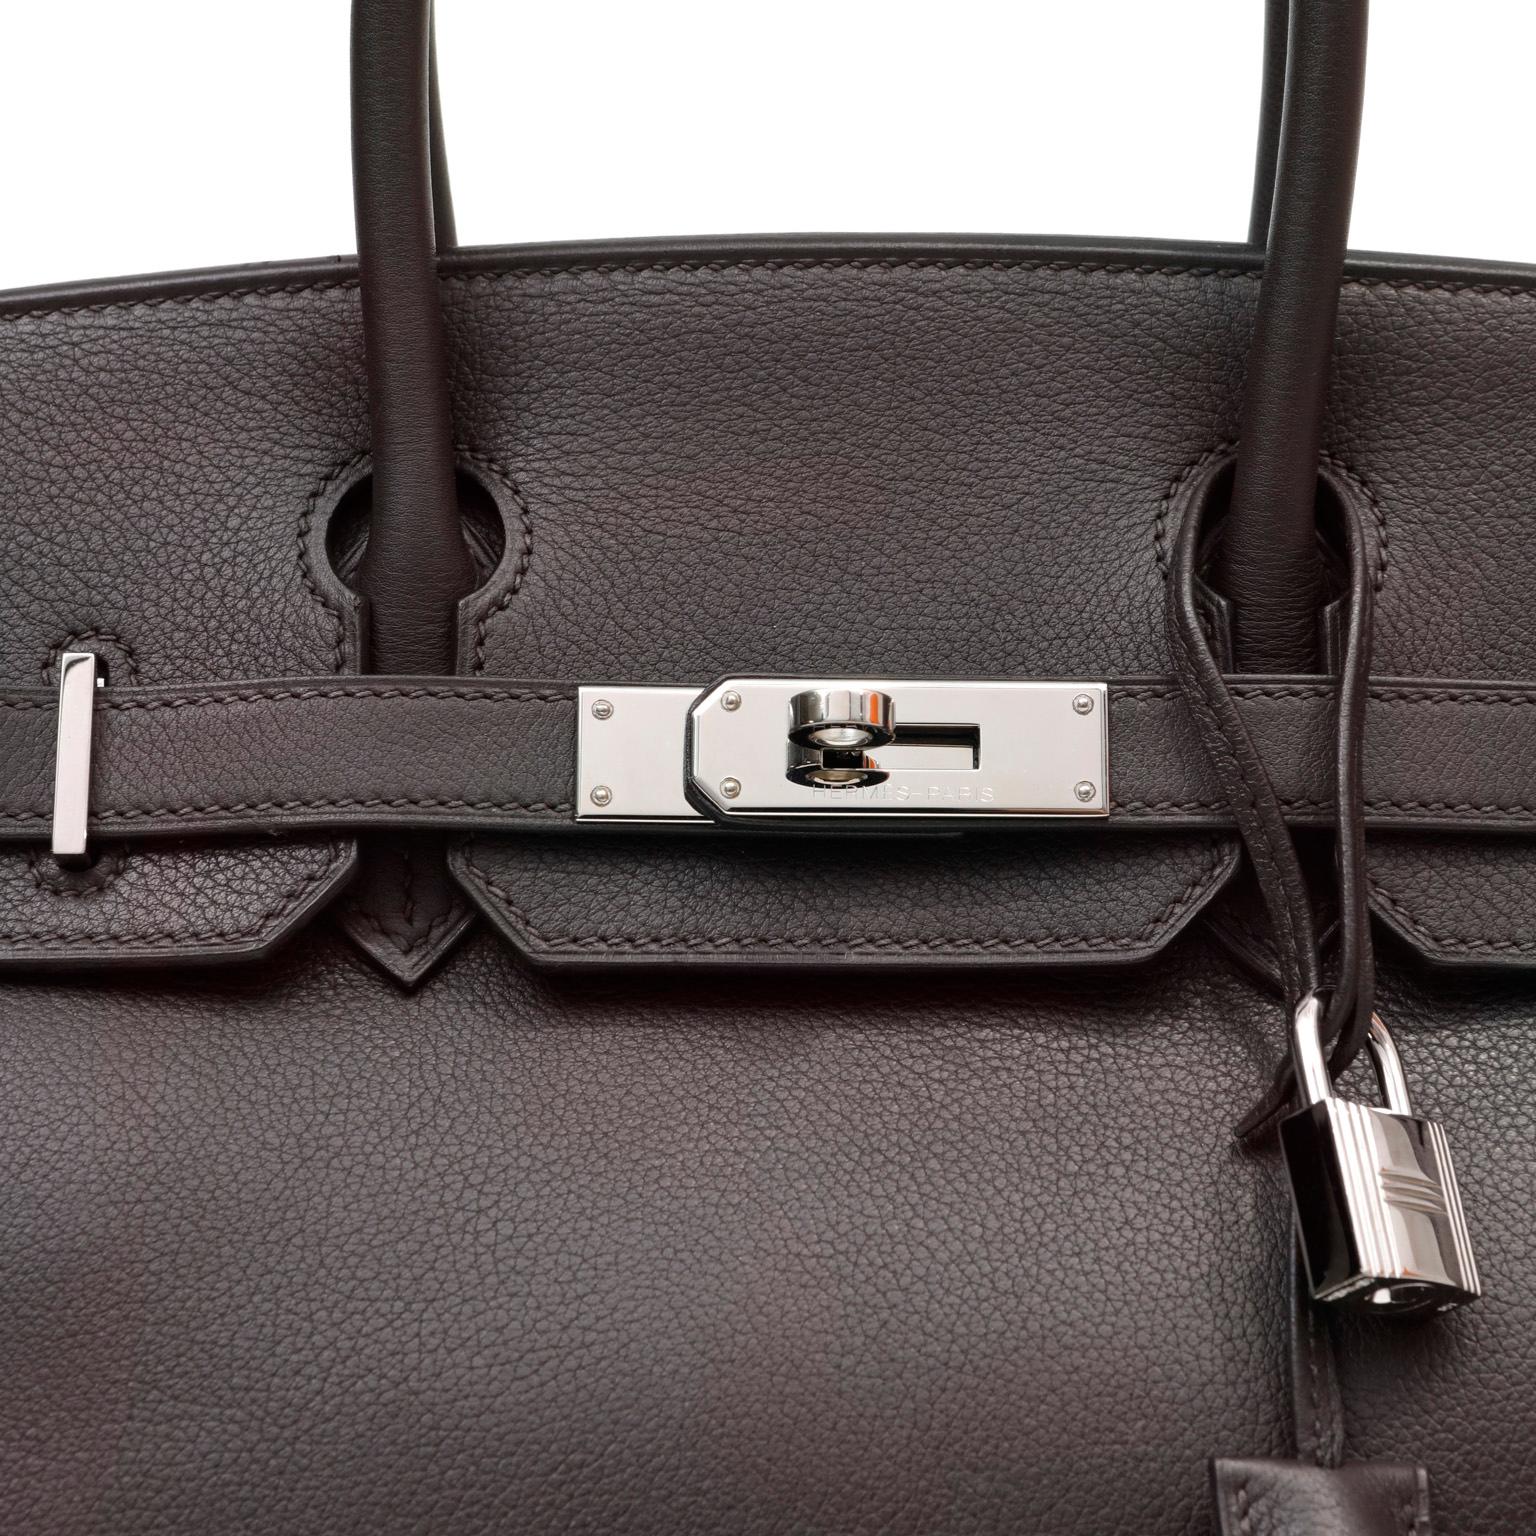 This authentic Hermès Deep Brown Evergrain 30 cm Birkin is in pristine condition.  Hand sewn and coveted worldwide; the Hermès Birkin is considered the epitome of luxury handbags.  Deep Havana Brown evokes the darkest espresso bean and is perfectly